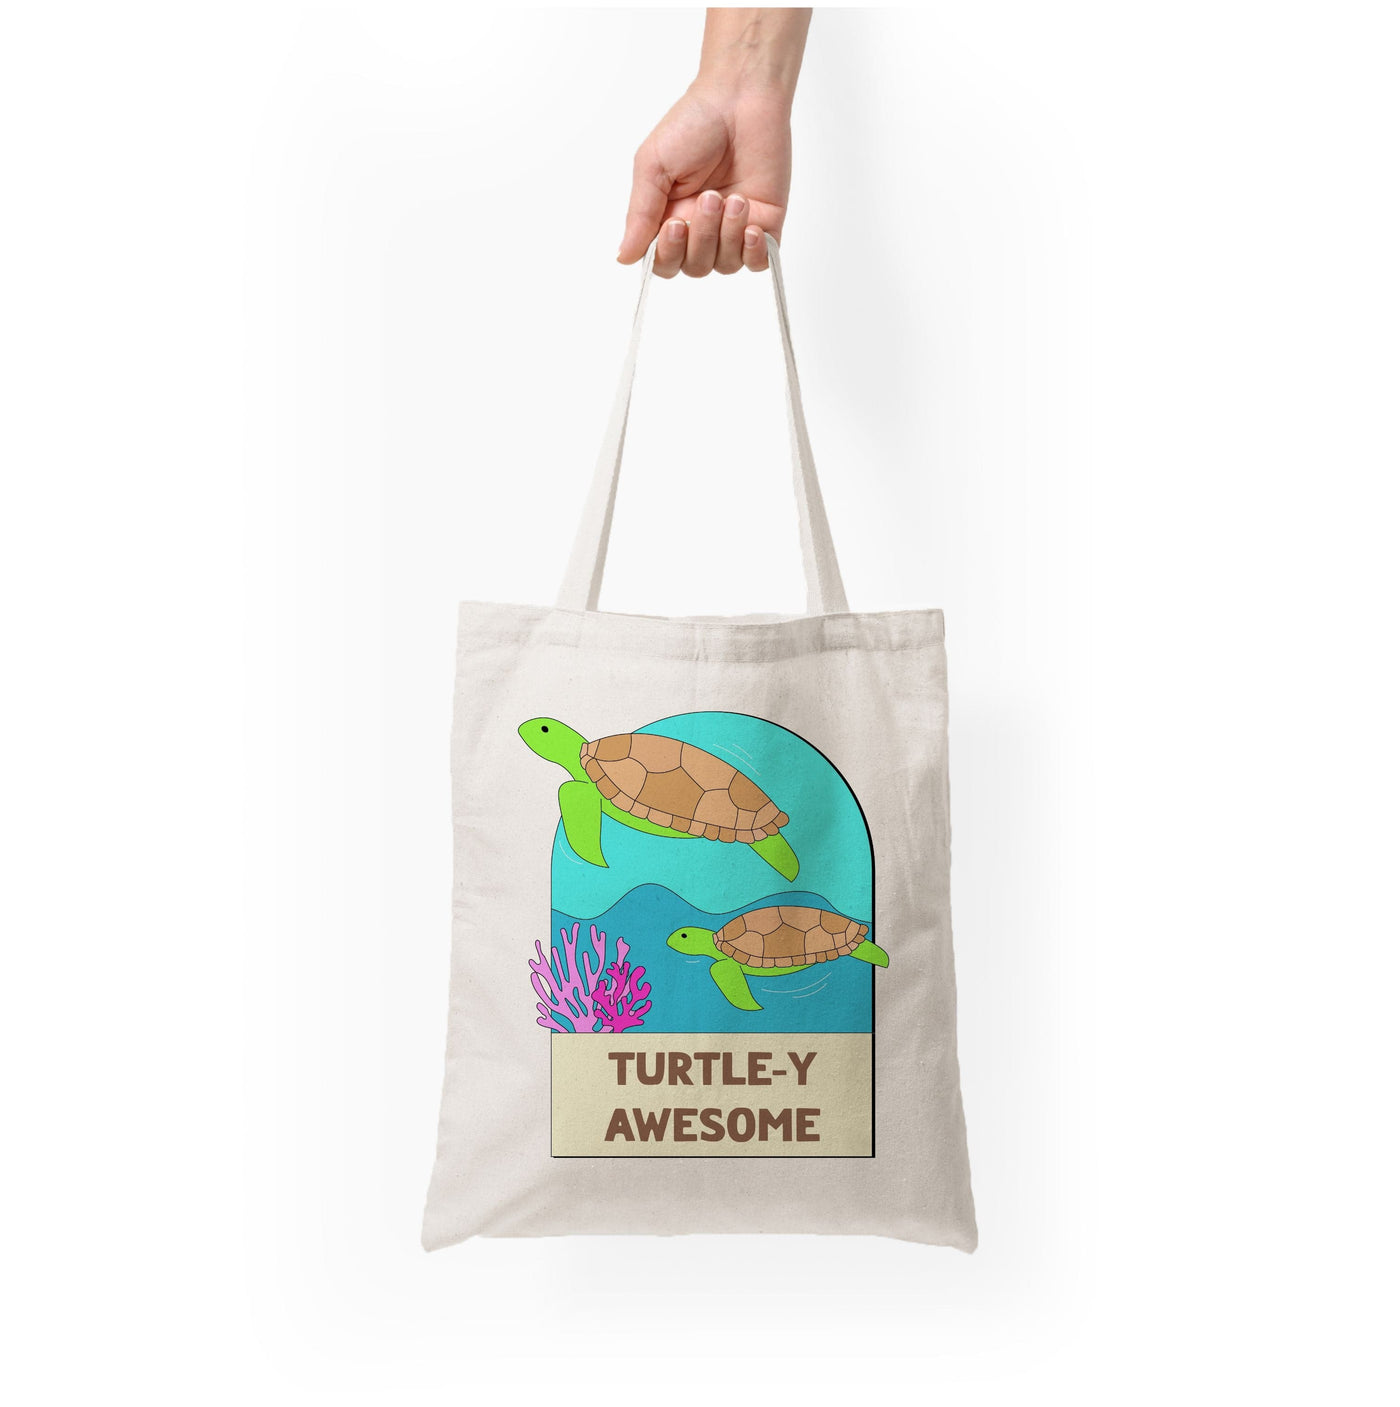 Turtle-y Awesome - Sealife Tote Bag